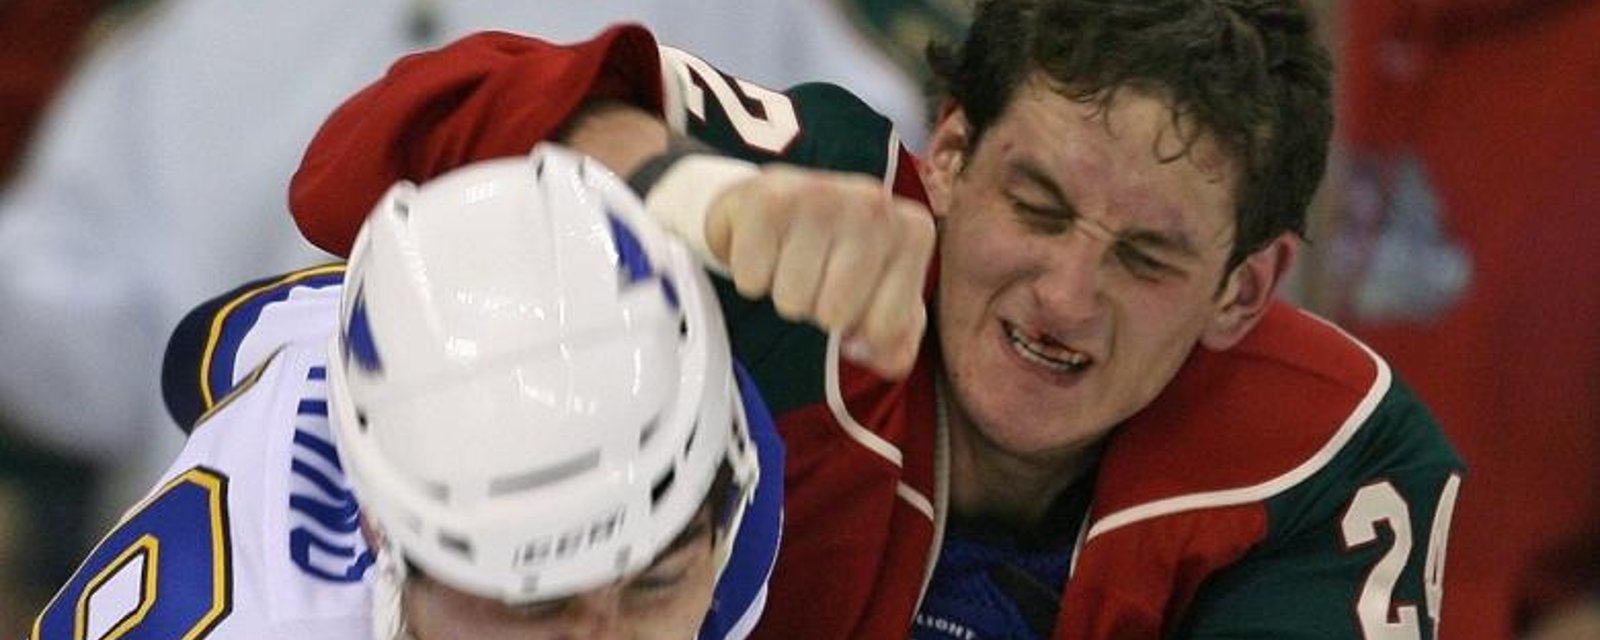 Man connected to death of Derek Boogaard pleads guilty to drug charges.